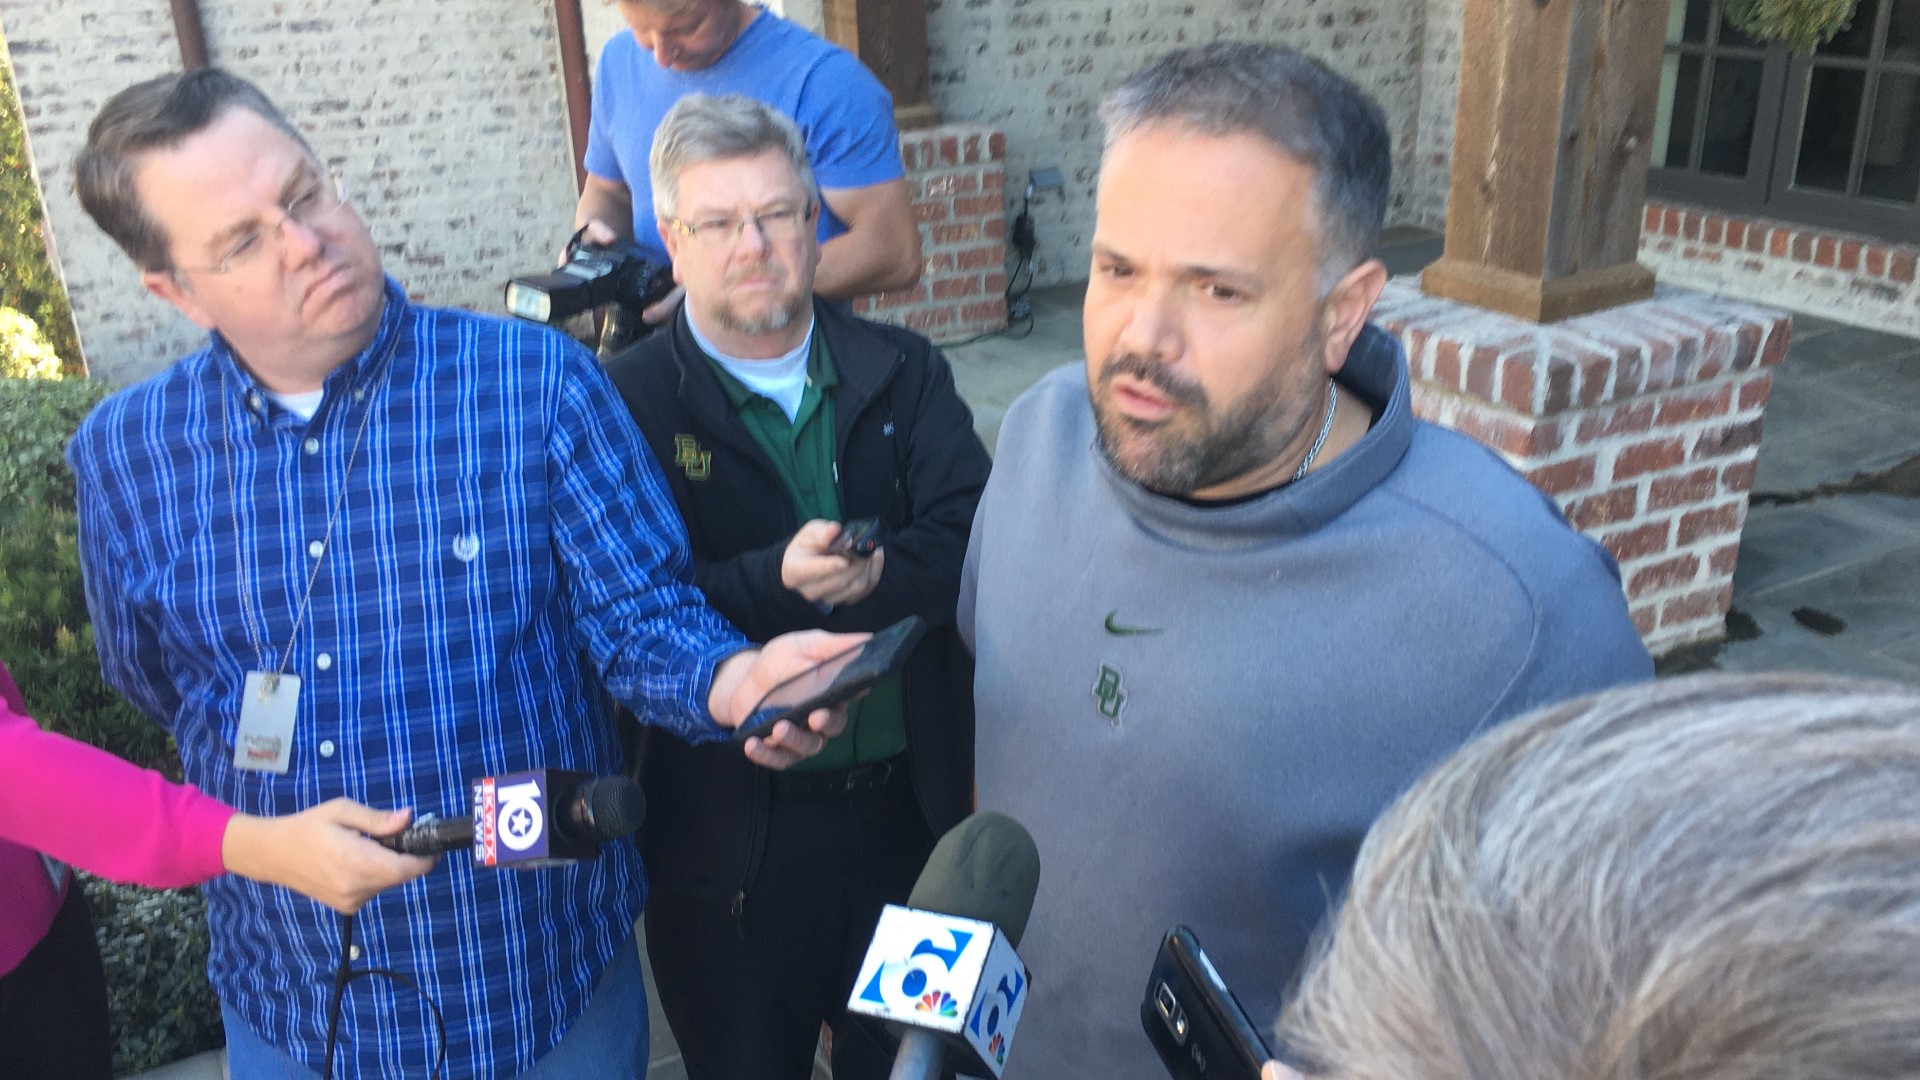 Matt Rhule confirmed to the 6 News sports team he will leave Baylor to coach for the Carolina Panthers